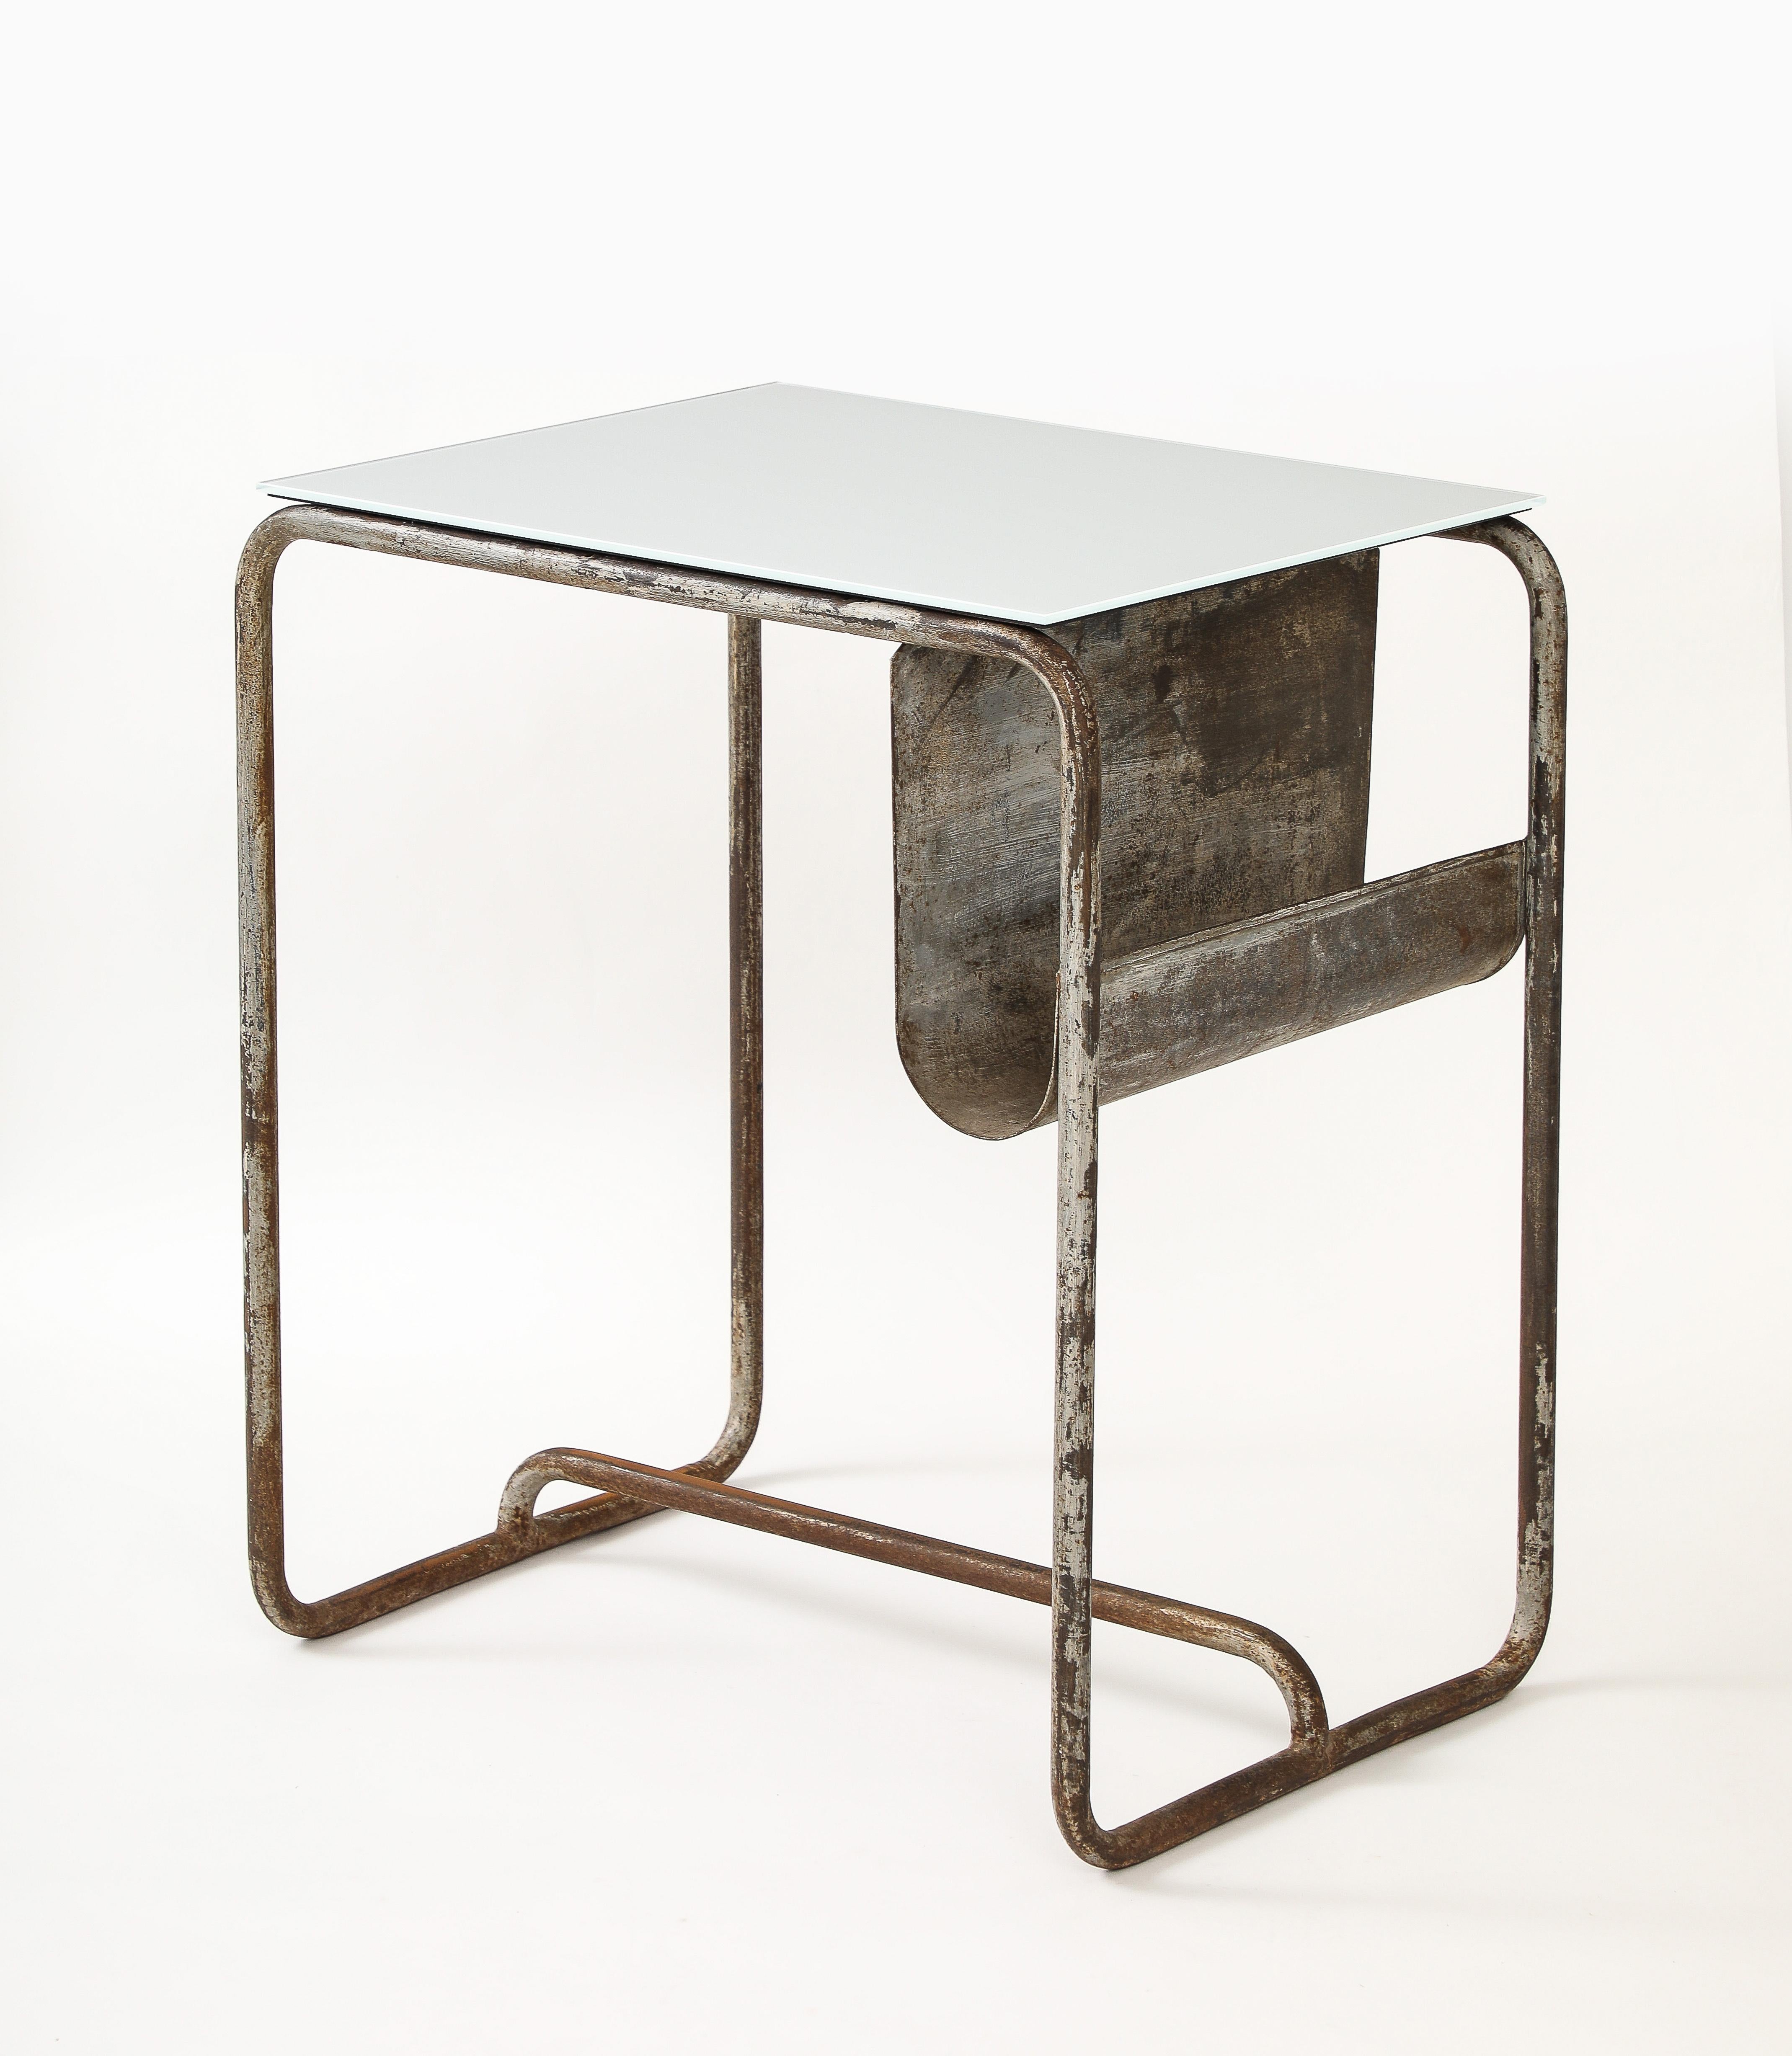 Early Modernist Desk Side Table, Nickel Patina, Opaline Top, France, c. 1920 For Sale 8